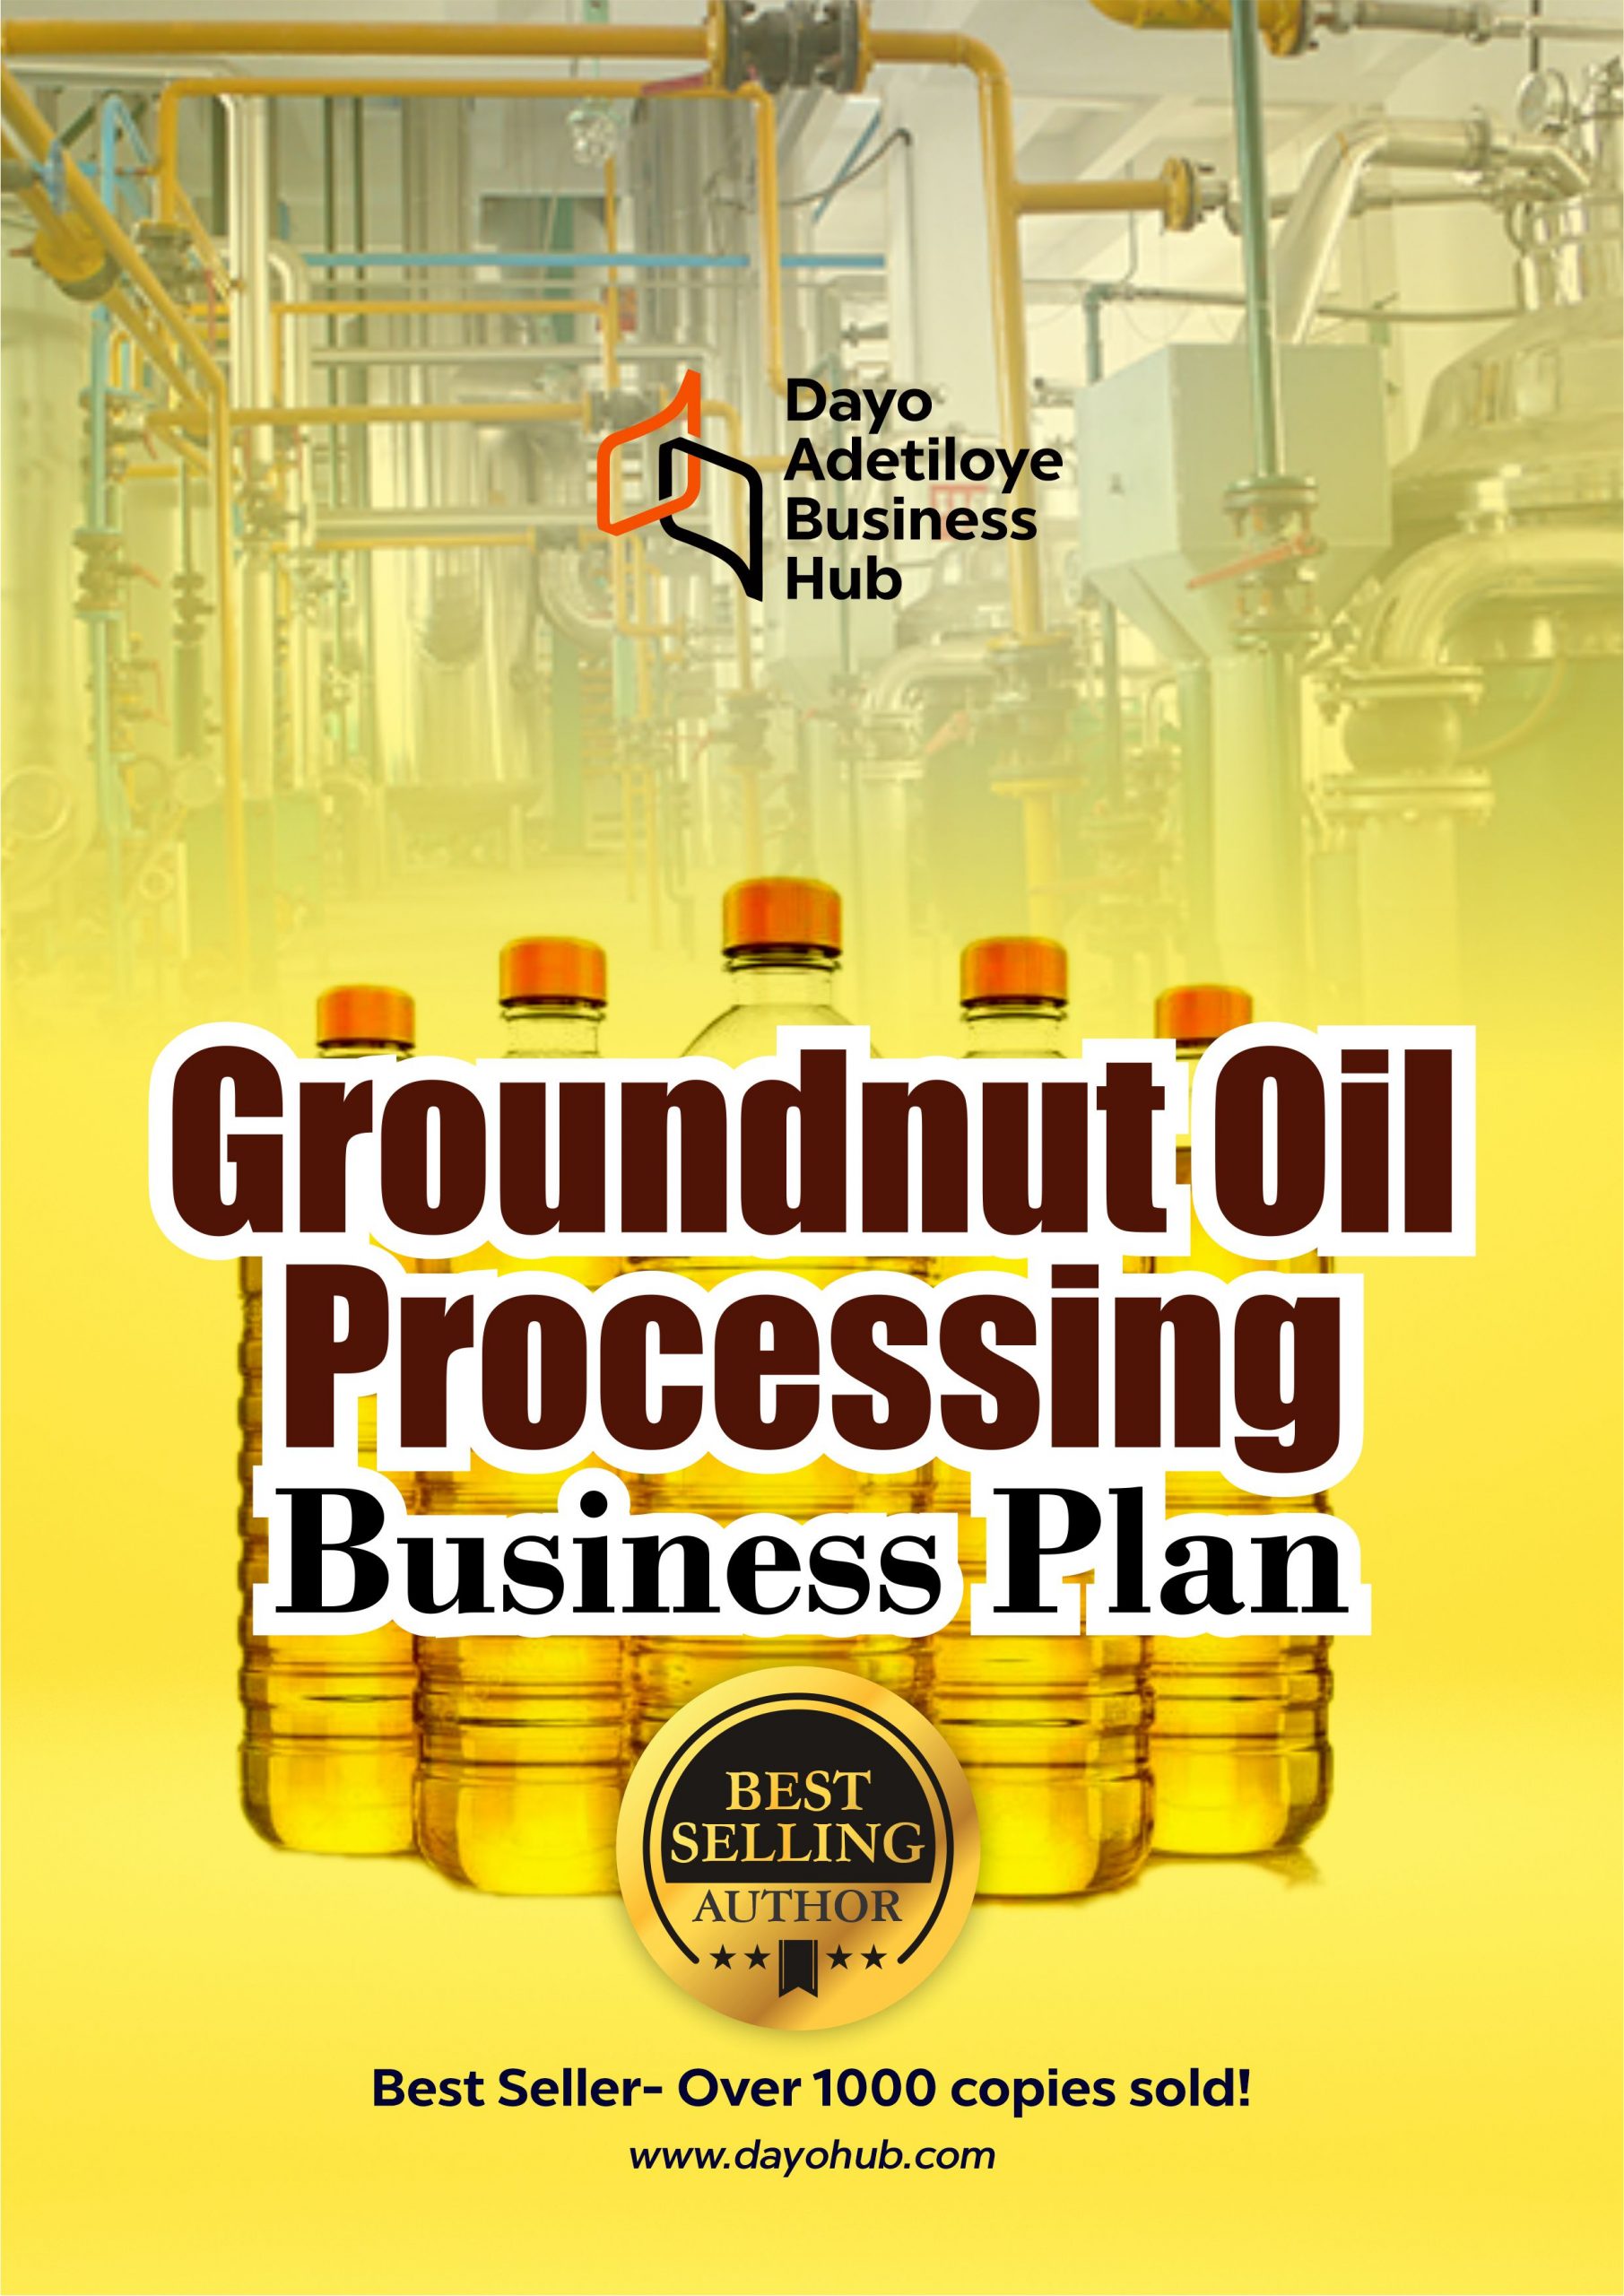 groundnut oil production business plan